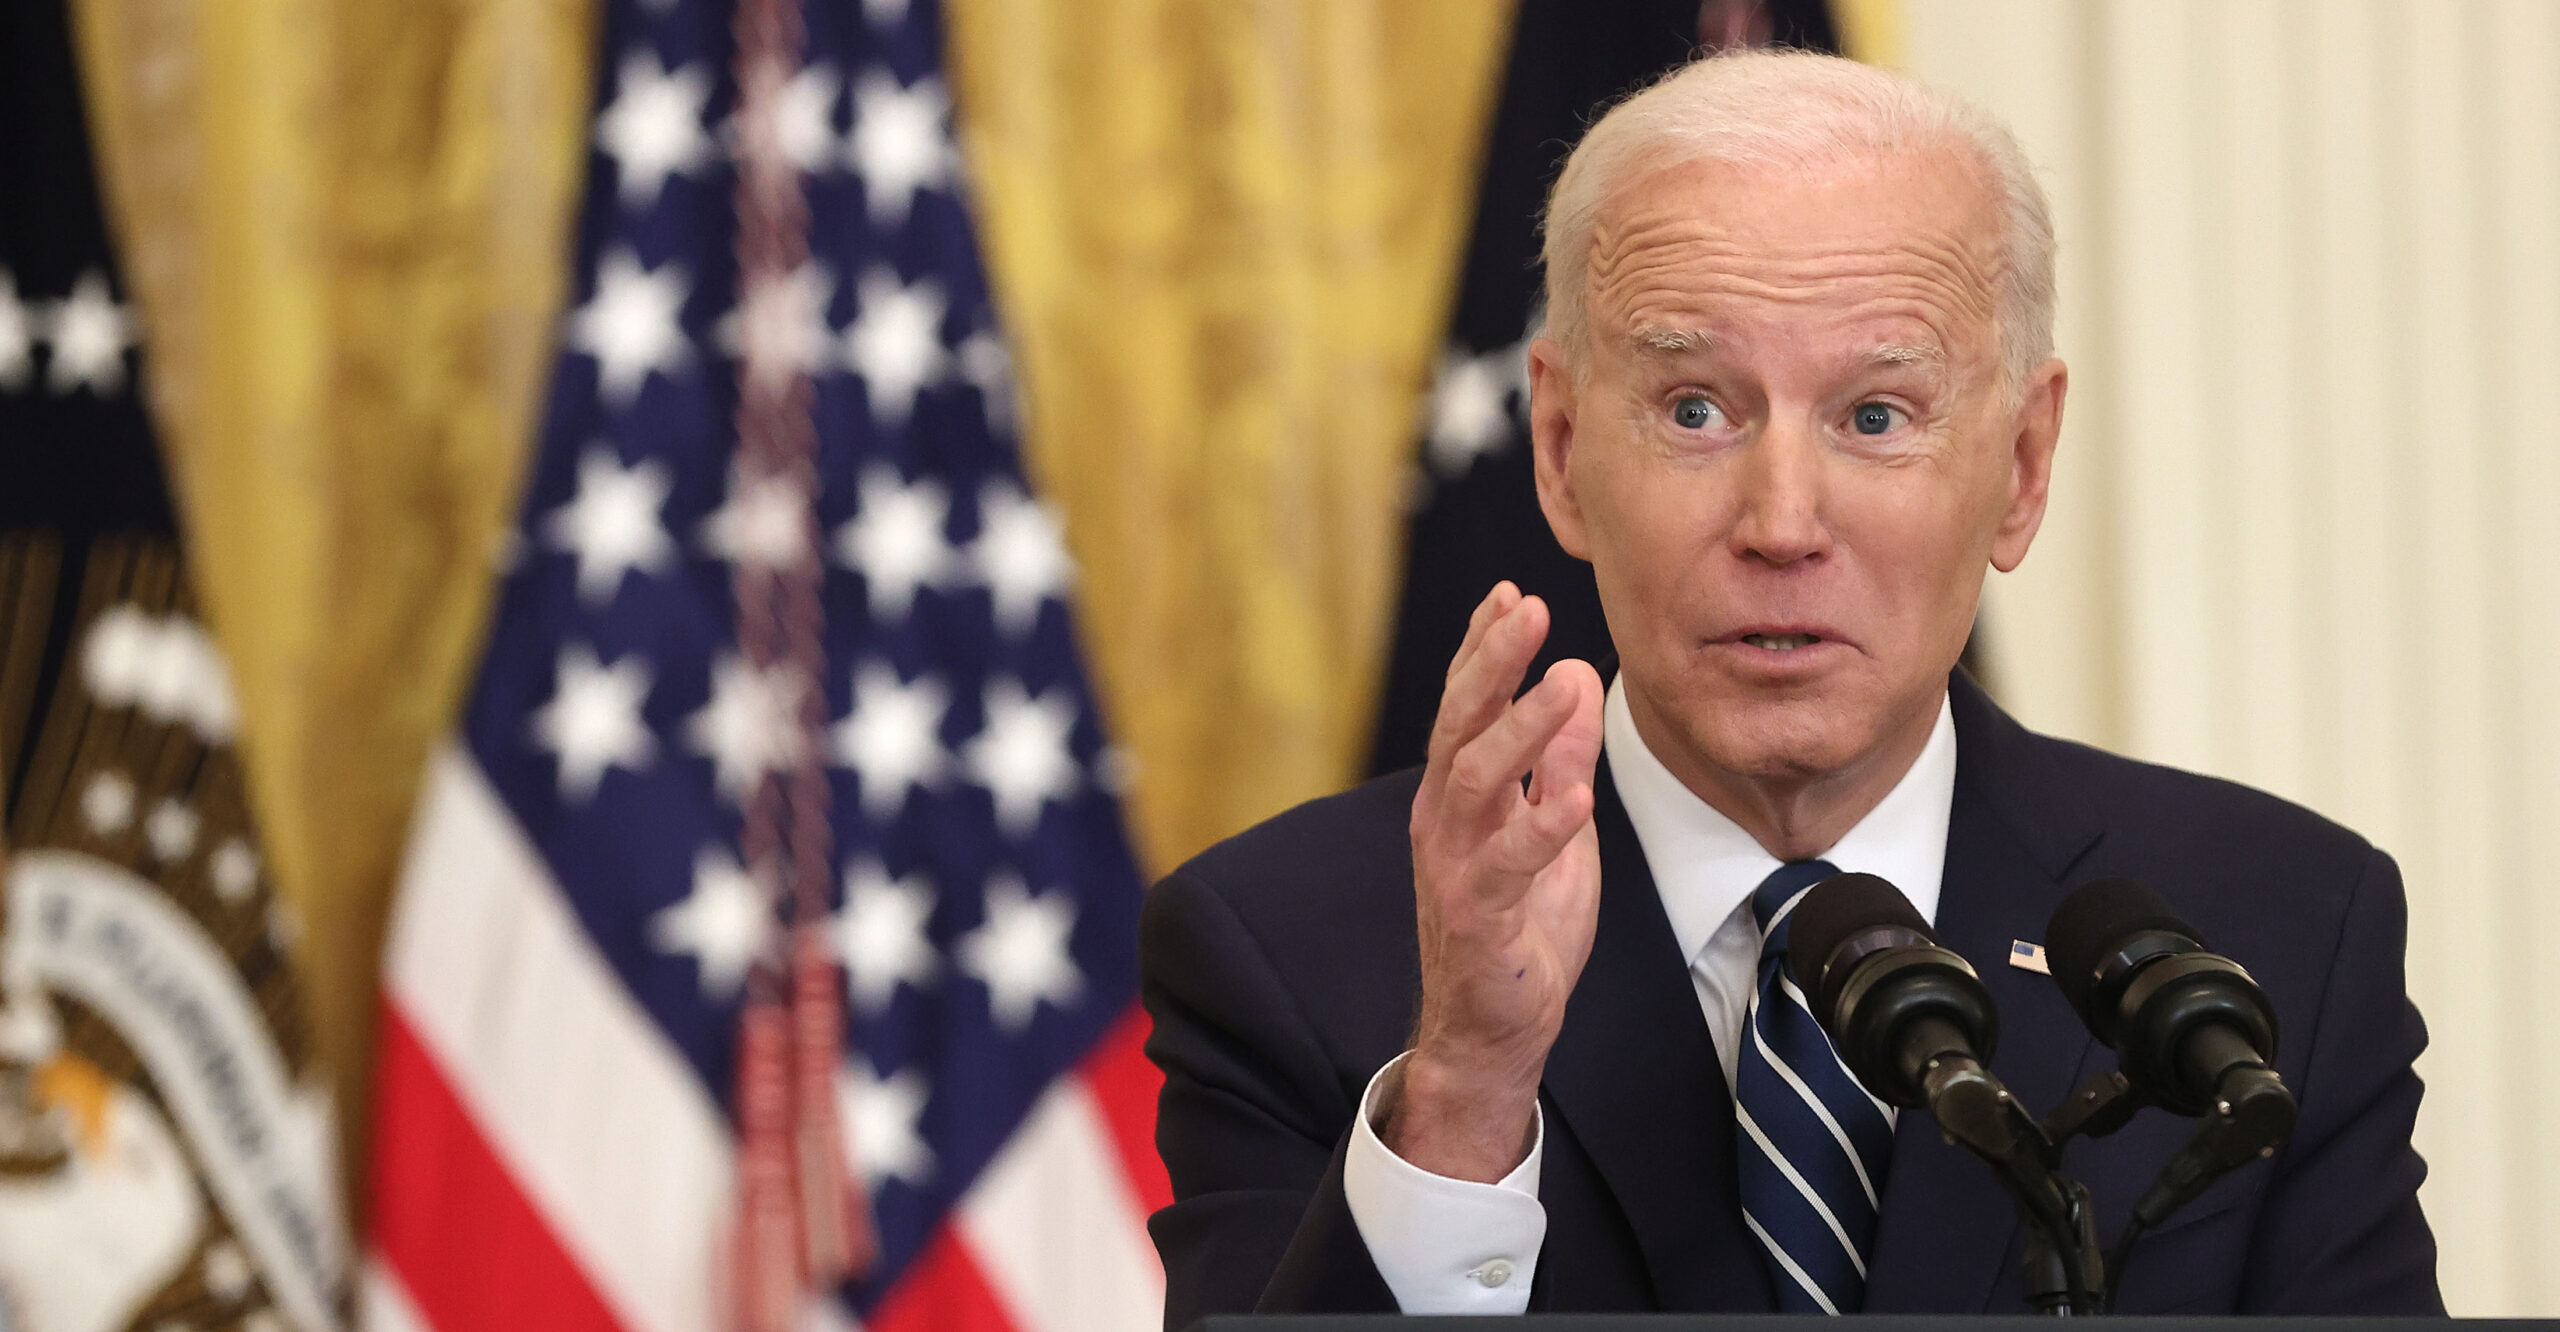 6 Takeaways From Biden's First Press Conference